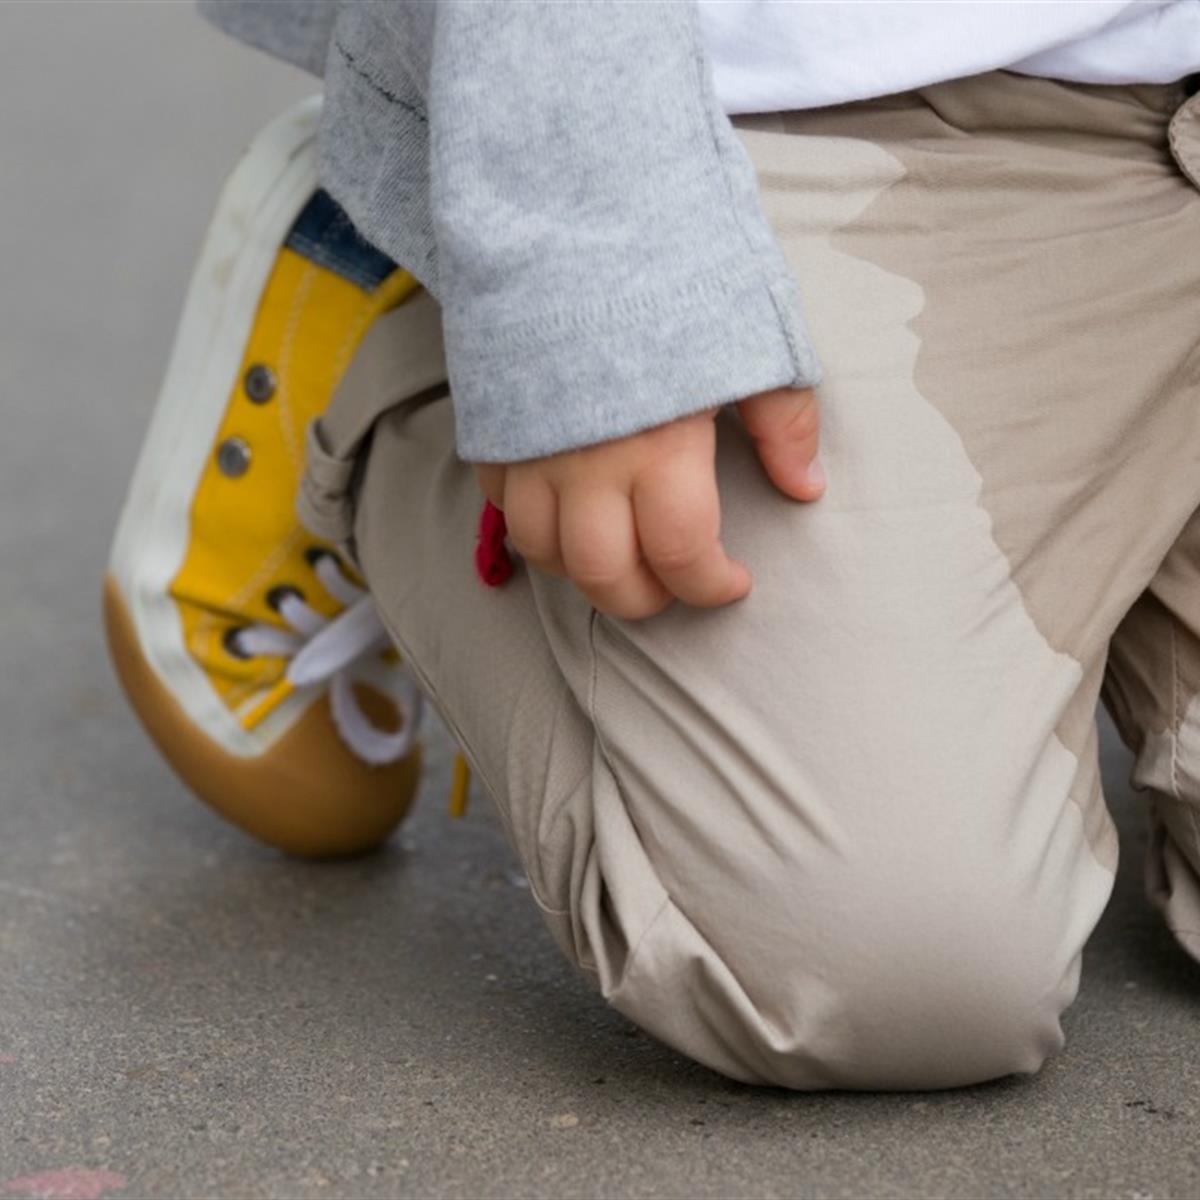 I Can't Stop Peeing My Pants – Physical Therapy Can Help! — In